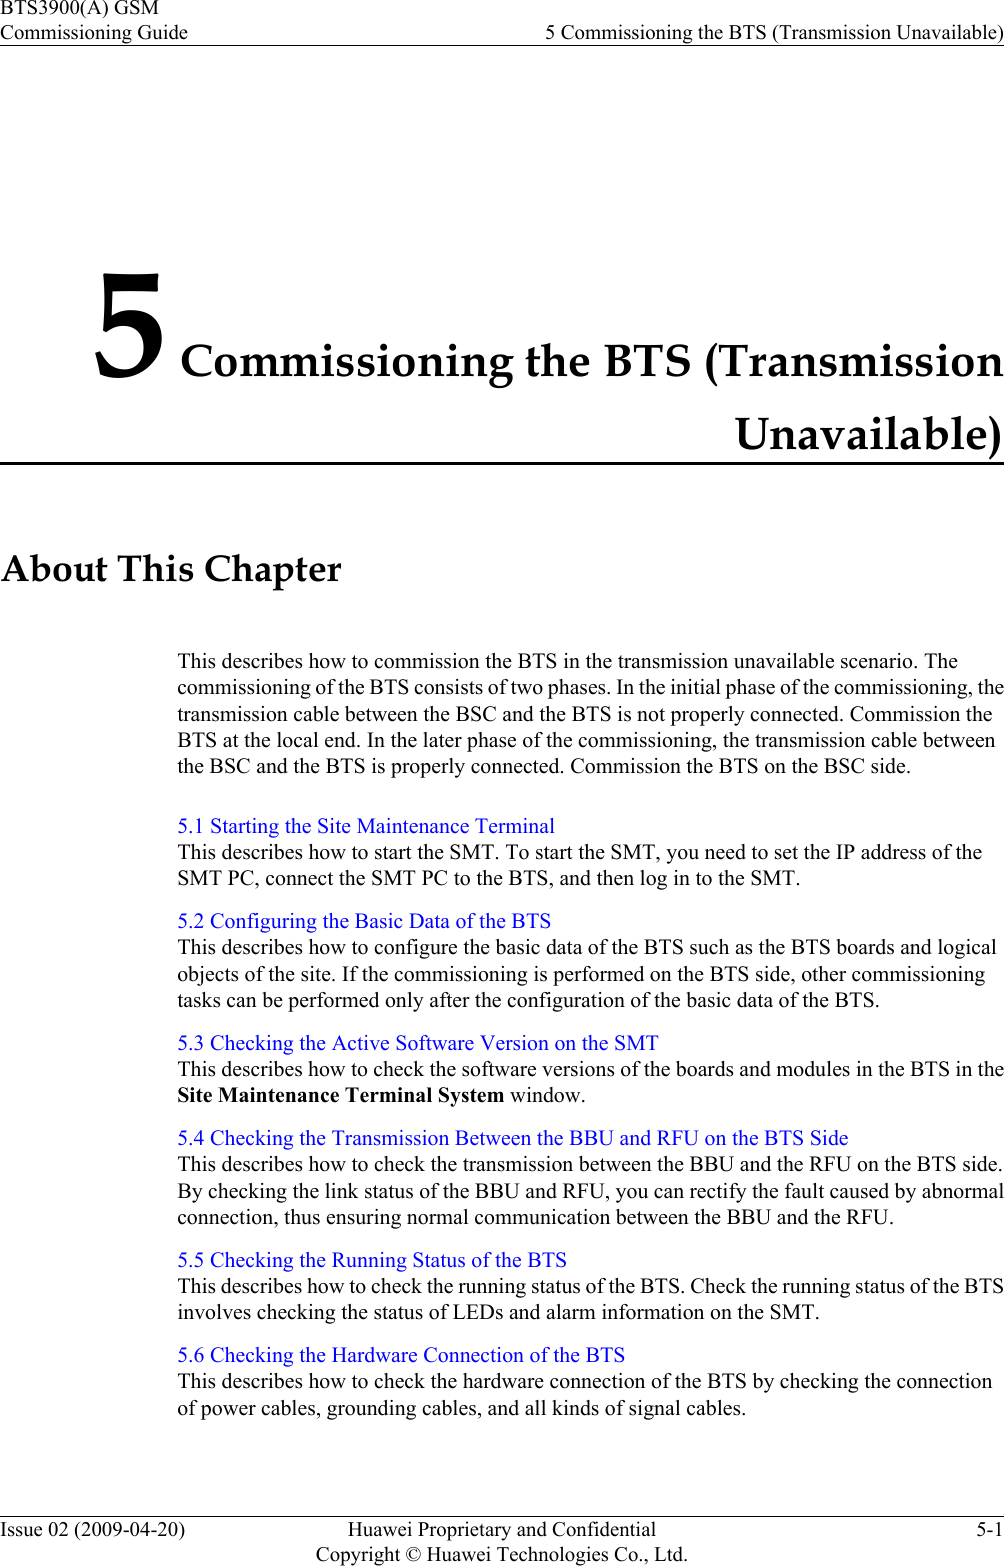 5 Commissioning the BTS (TransmissionUnavailable)About This ChapterThis describes how to commission the BTS in the transmission unavailable scenario. Thecommissioning of the BTS consists of two phases. In the initial phase of the commissioning, thetransmission cable between the BSC and the BTS is not properly connected. Commission theBTS at the local end. In the later phase of the commissioning, the transmission cable betweenthe BSC and the BTS is properly connected. Commission the BTS on the BSC side.5.1 Starting the Site Maintenance TerminalThis describes how to start the SMT. To start the SMT, you need to set the IP address of theSMT PC, connect the SMT PC to the BTS, and then log in to the SMT.5.2 Configuring the Basic Data of the BTSThis describes how to configure the basic data of the BTS such as the BTS boards and logicalobjects of the site. If the commissioning is performed on the BTS side, other commissioningtasks can be performed only after the configuration of the basic data of the BTS.5.3 Checking the Active Software Version on the SMTThis describes how to check the software versions of the boards and modules in the BTS in theSite Maintenance Terminal System window.5.4 Checking the Transmission Between the BBU and RFU on the BTS SideThis describes how to check the transmission between the BBU and the RFU on the BTS side.By checking the link status of the BBU and RFU, you can rectify the fault caused by abnormalconnection, thus ensuring normal communication between the BBU and the RFU.5.5 Checking the Running Status of the BTSThis describes how to check the running status of the BTS. Check the running status of the BTSinvolves checking the status of LEDs and alarm information on the SMT.5.6 Checking the Hardware Connection of the BTSThis describes how to check the hardware connection of the BTS by checking the connectionof power cables, grounding cables, and all kinds of signal cables.BTS3900(A) GSMCommissioning Guide 5 Commissioning the BTS (Transmission Unavailable)Issue 02 (2009-04-20) Huawei Proprietary and ConfidentialCopyright © Huawei Technologies Co., Ltd.5-1